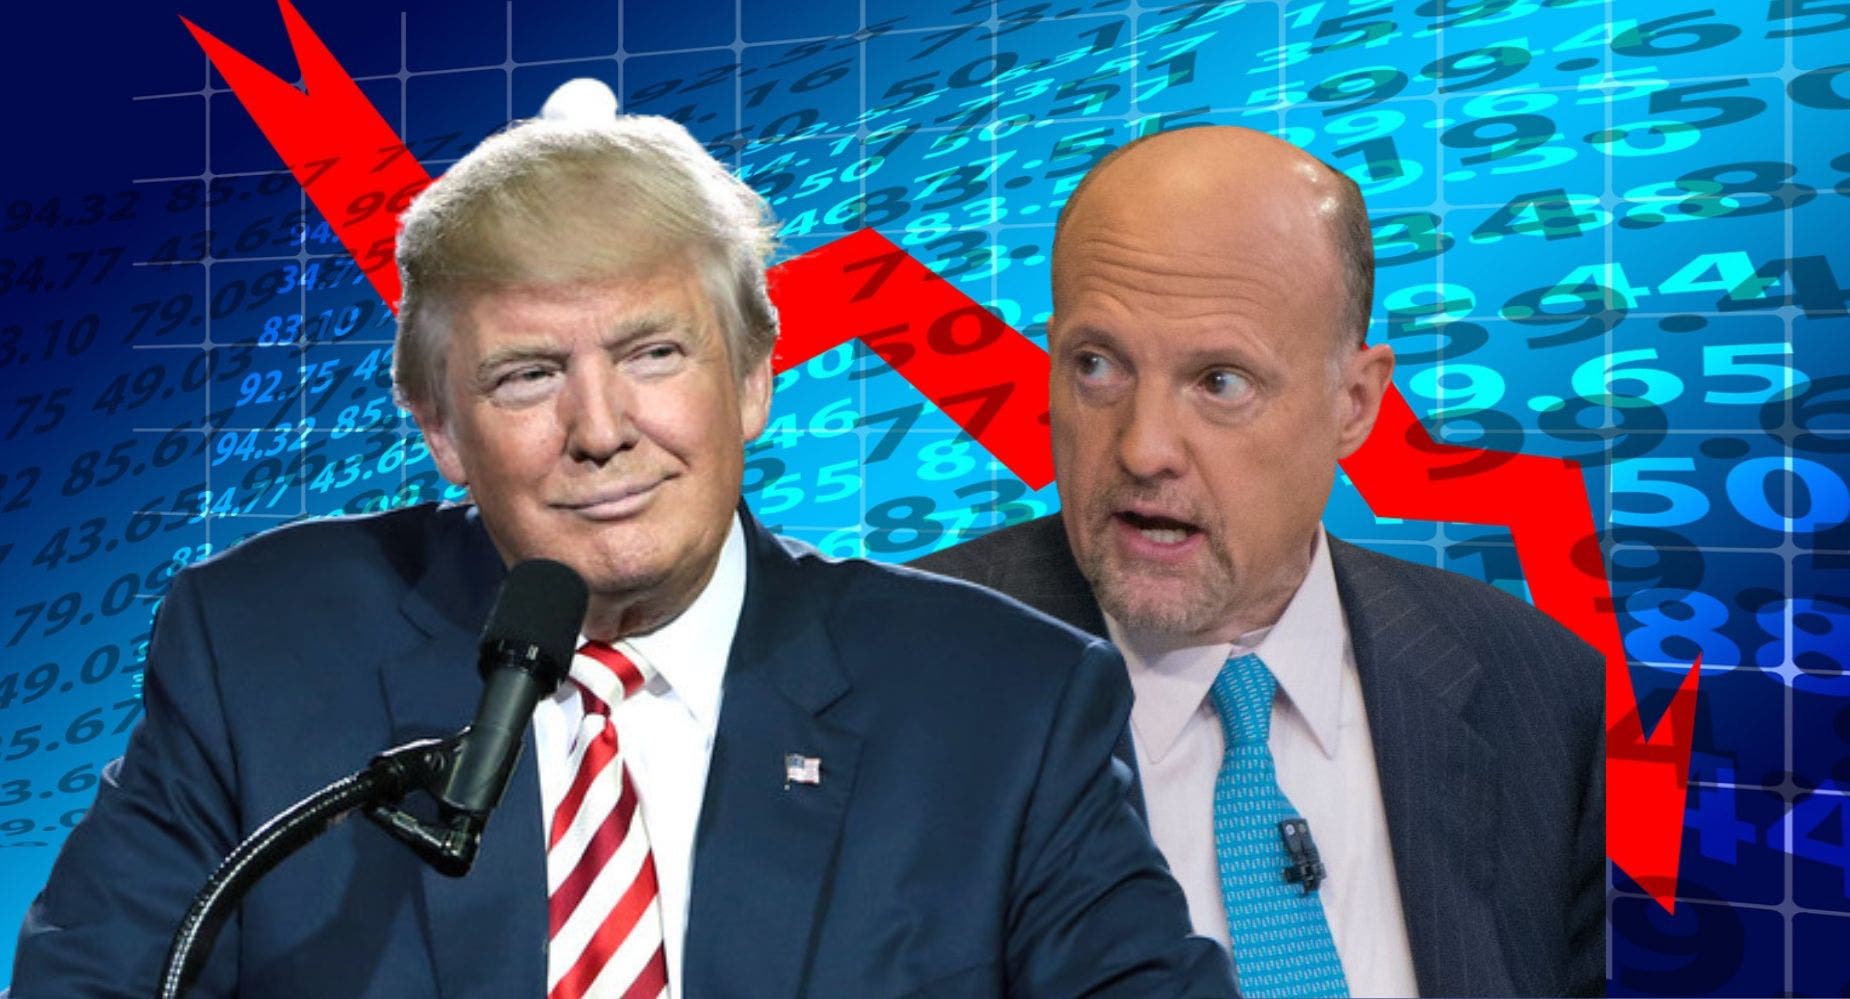 Cramer Recommends Avoiding This Trump-Linked SPAC: Here's Why